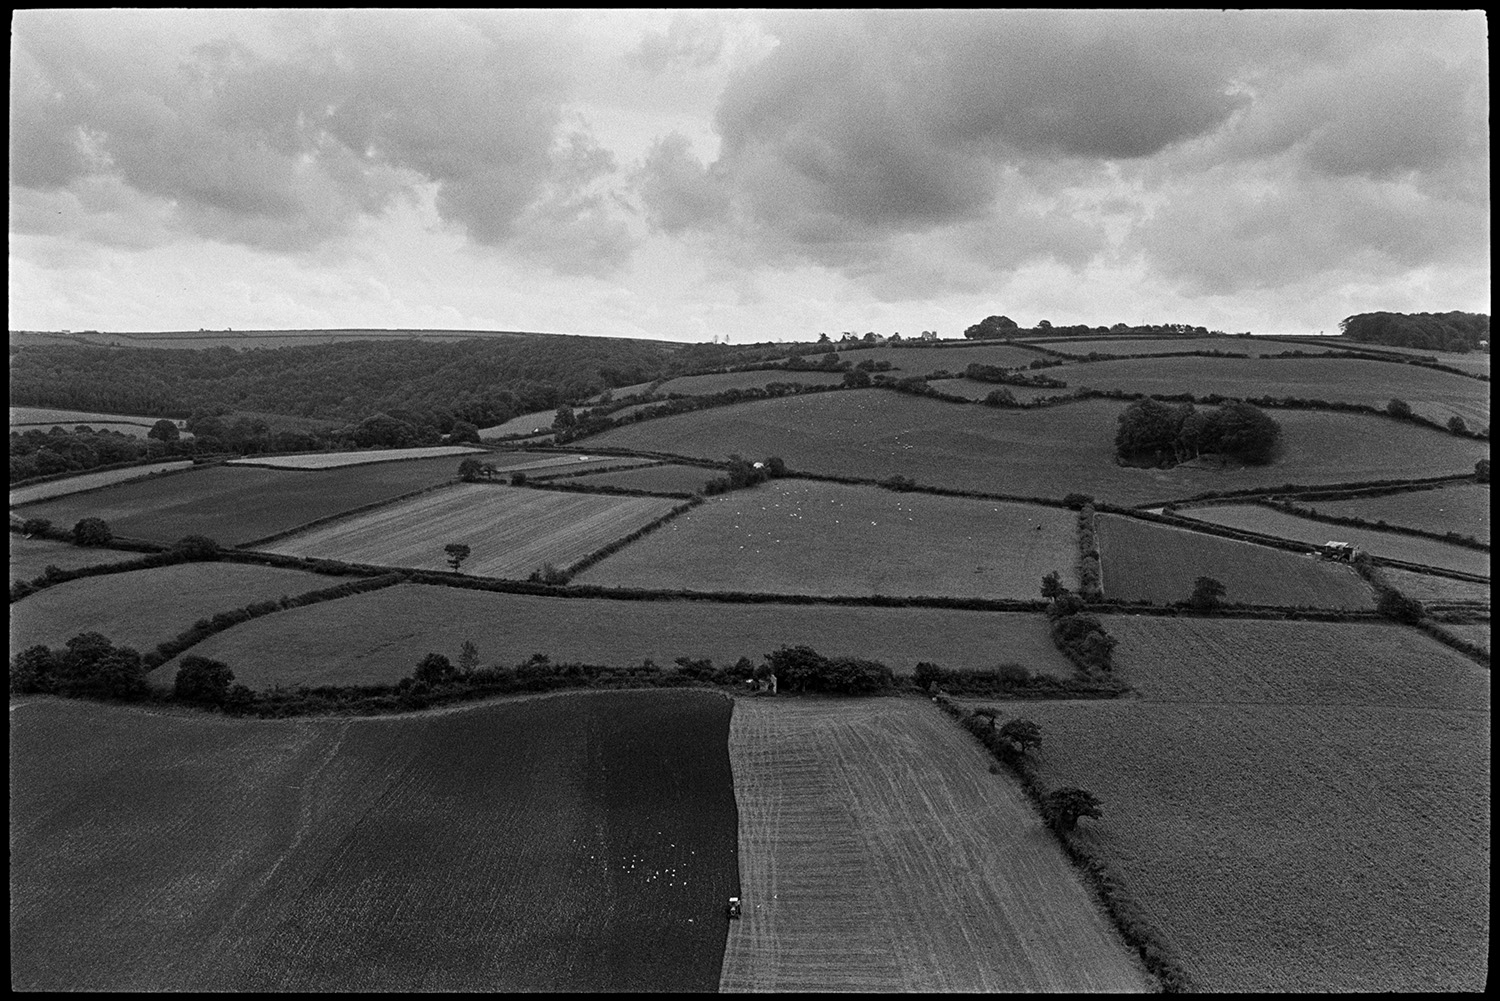 Landscape with ploughed fields clouds and hedgerows.
[A view of hills with woodland, fields and hedges at Torrington. A tractor can be seen ploughing a field in the foreground. Clouds are visible in the sky above the fields.]